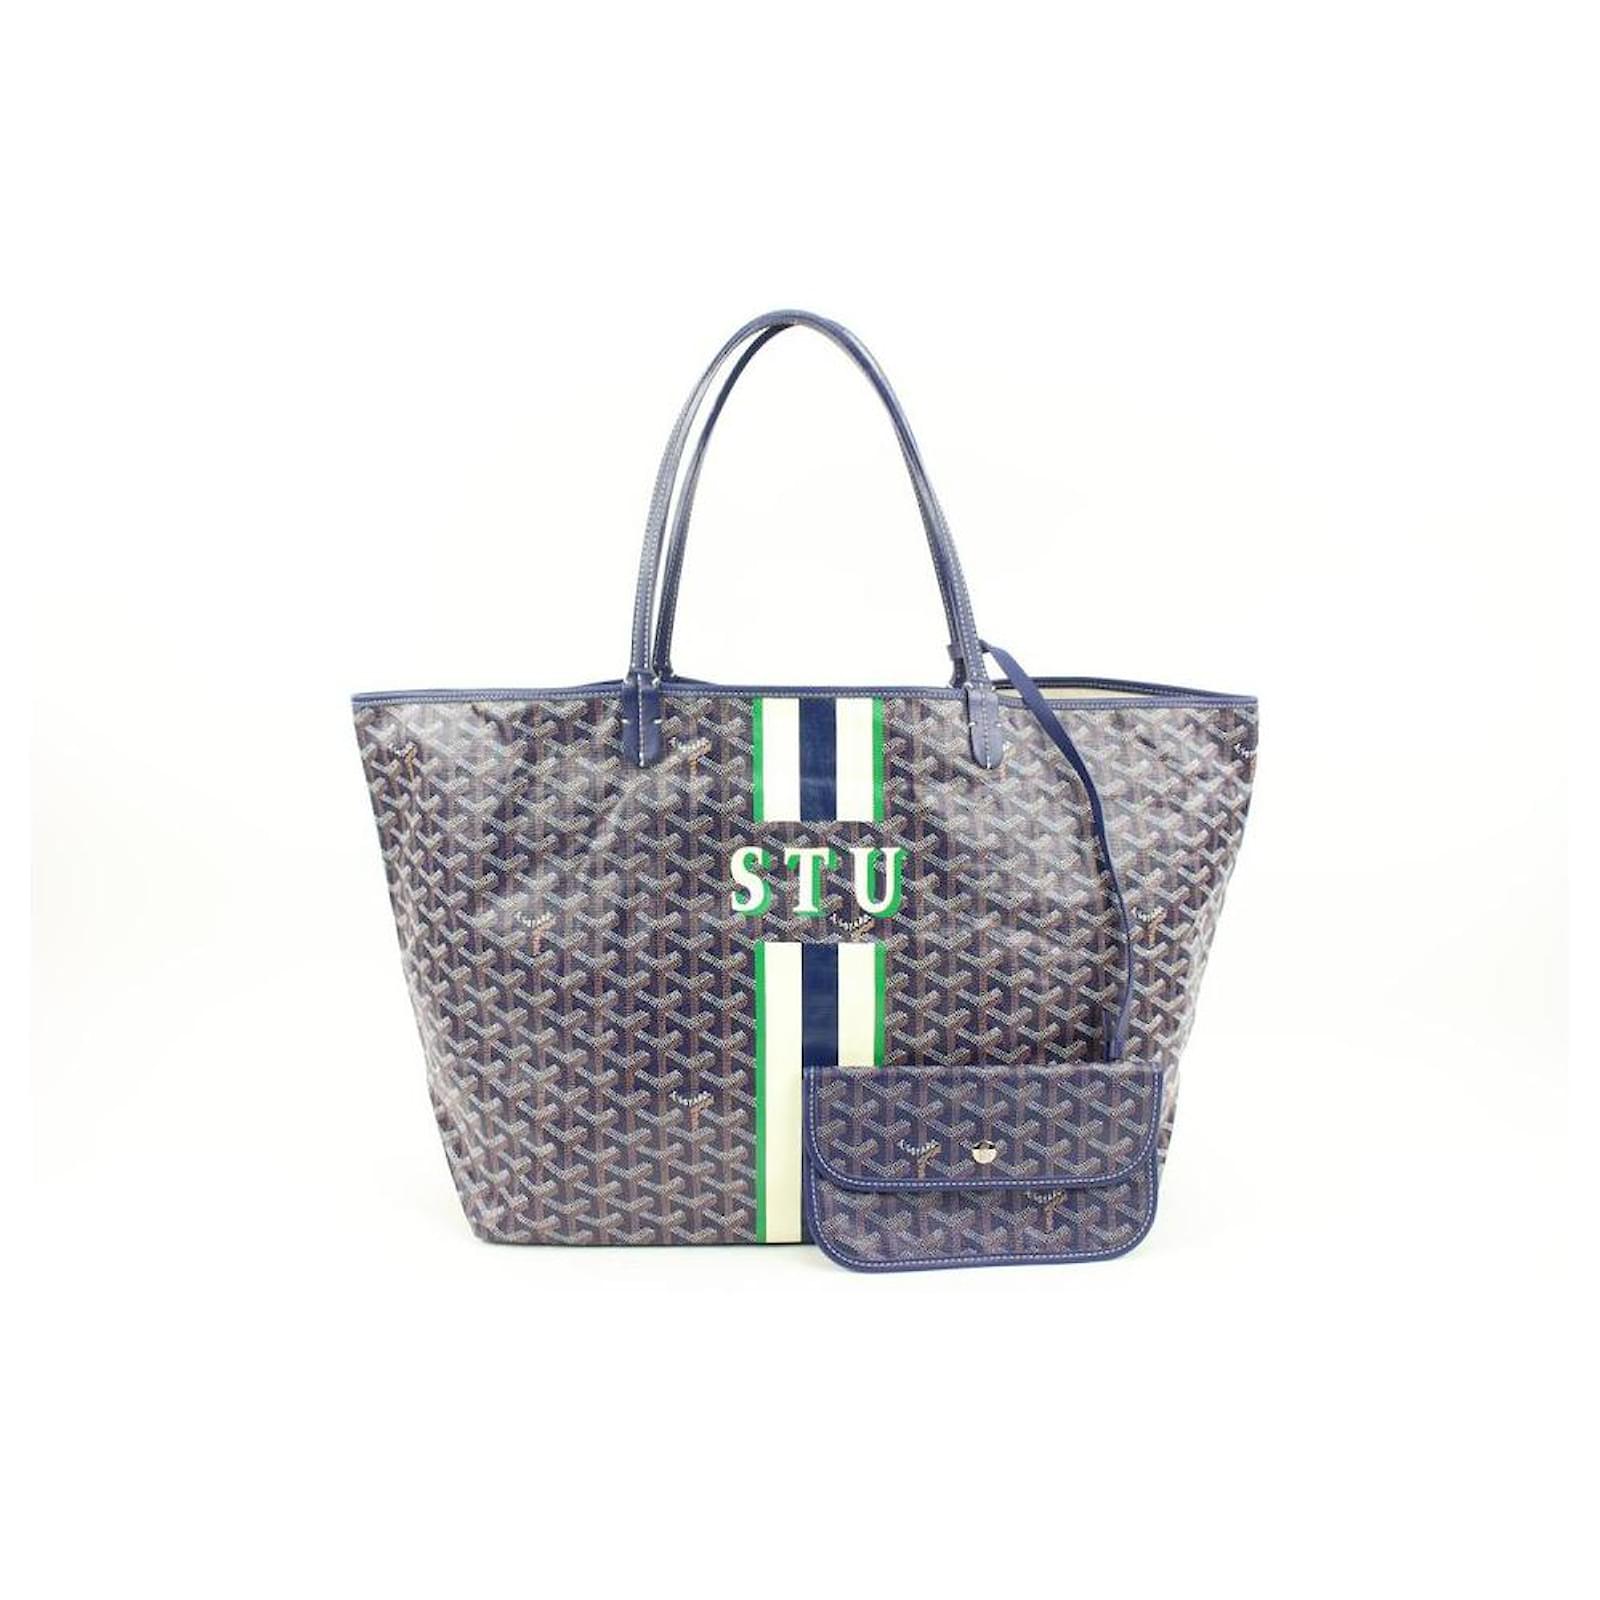 Goyard St Louis PM Tote with Pouch